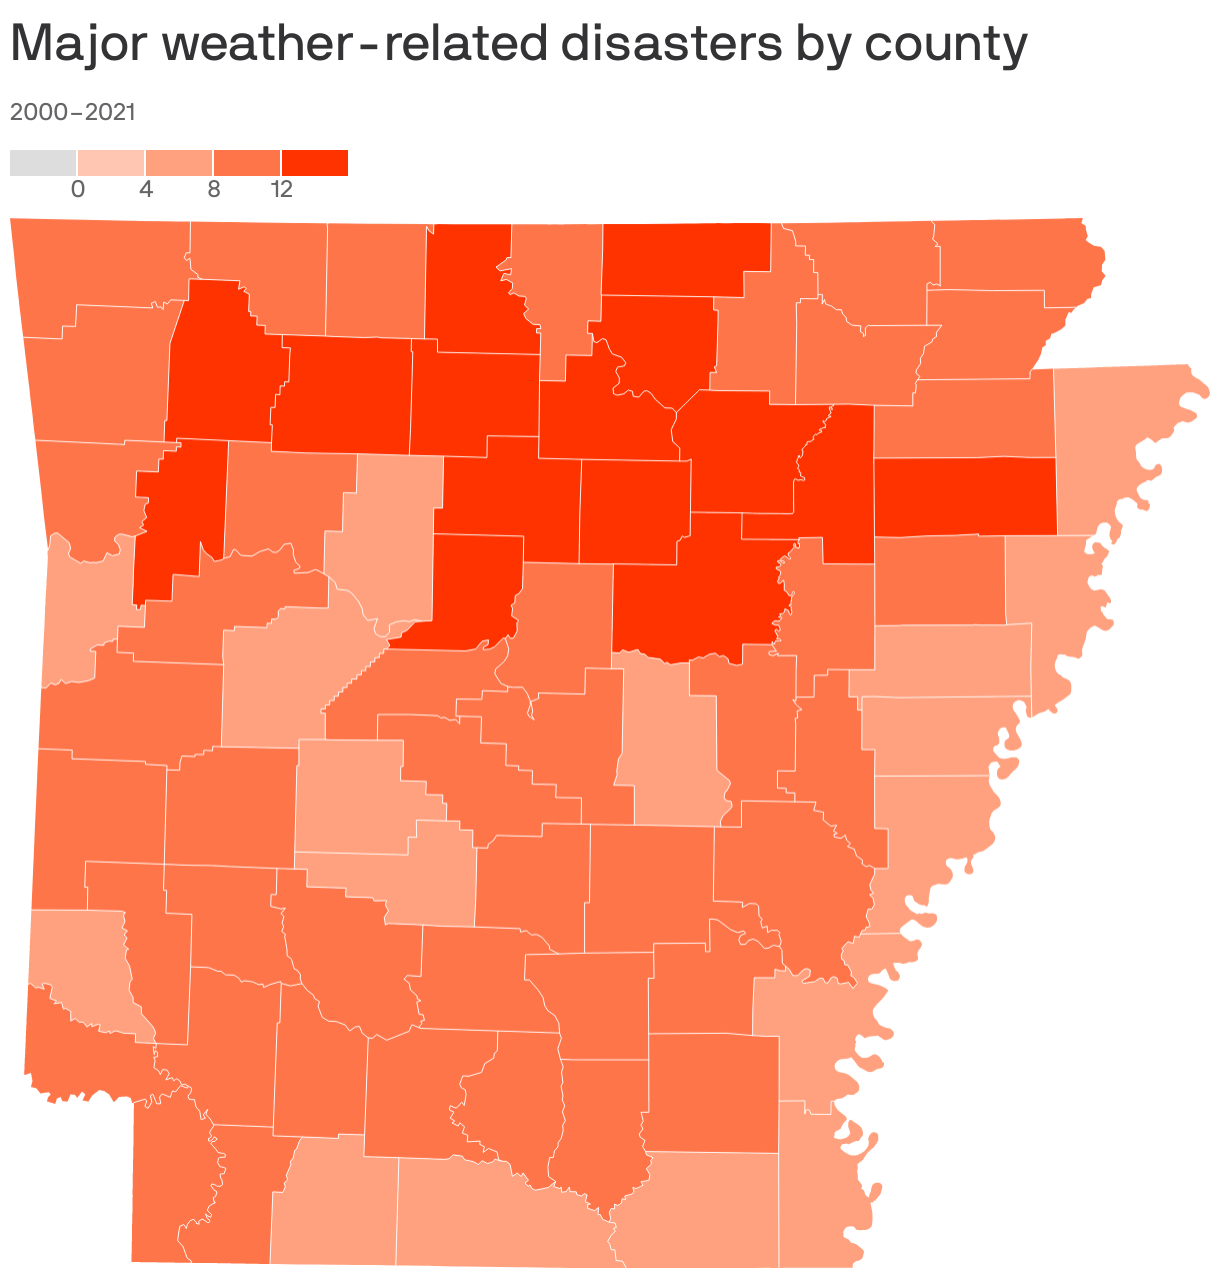 Major weather-related disasters by county